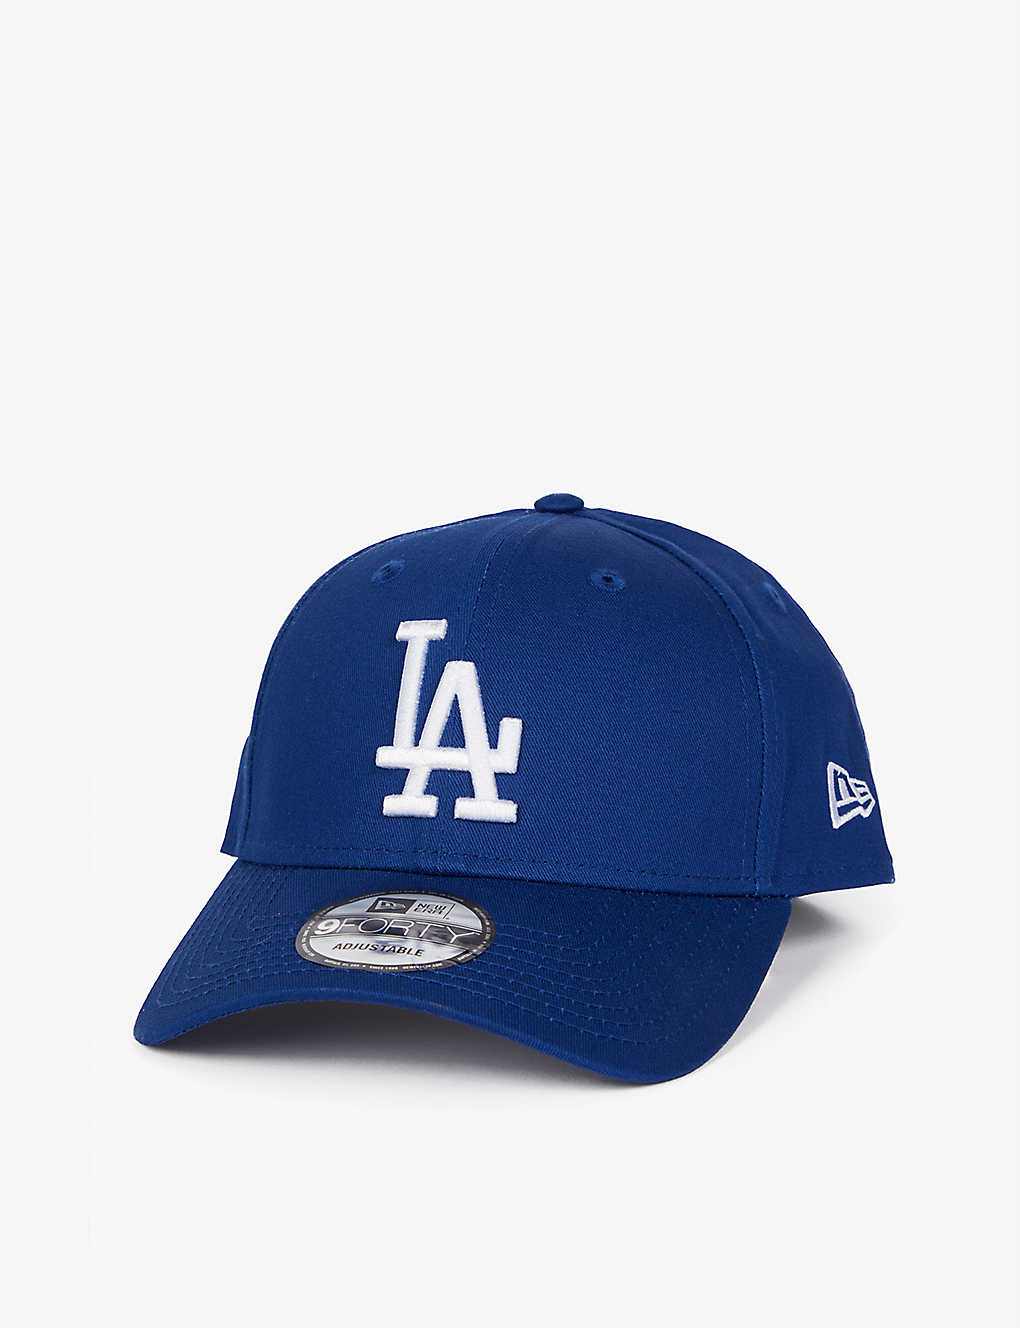 New Era 9forty Los Angeles Dodgers Cotton Snapback Cap In Blue And White